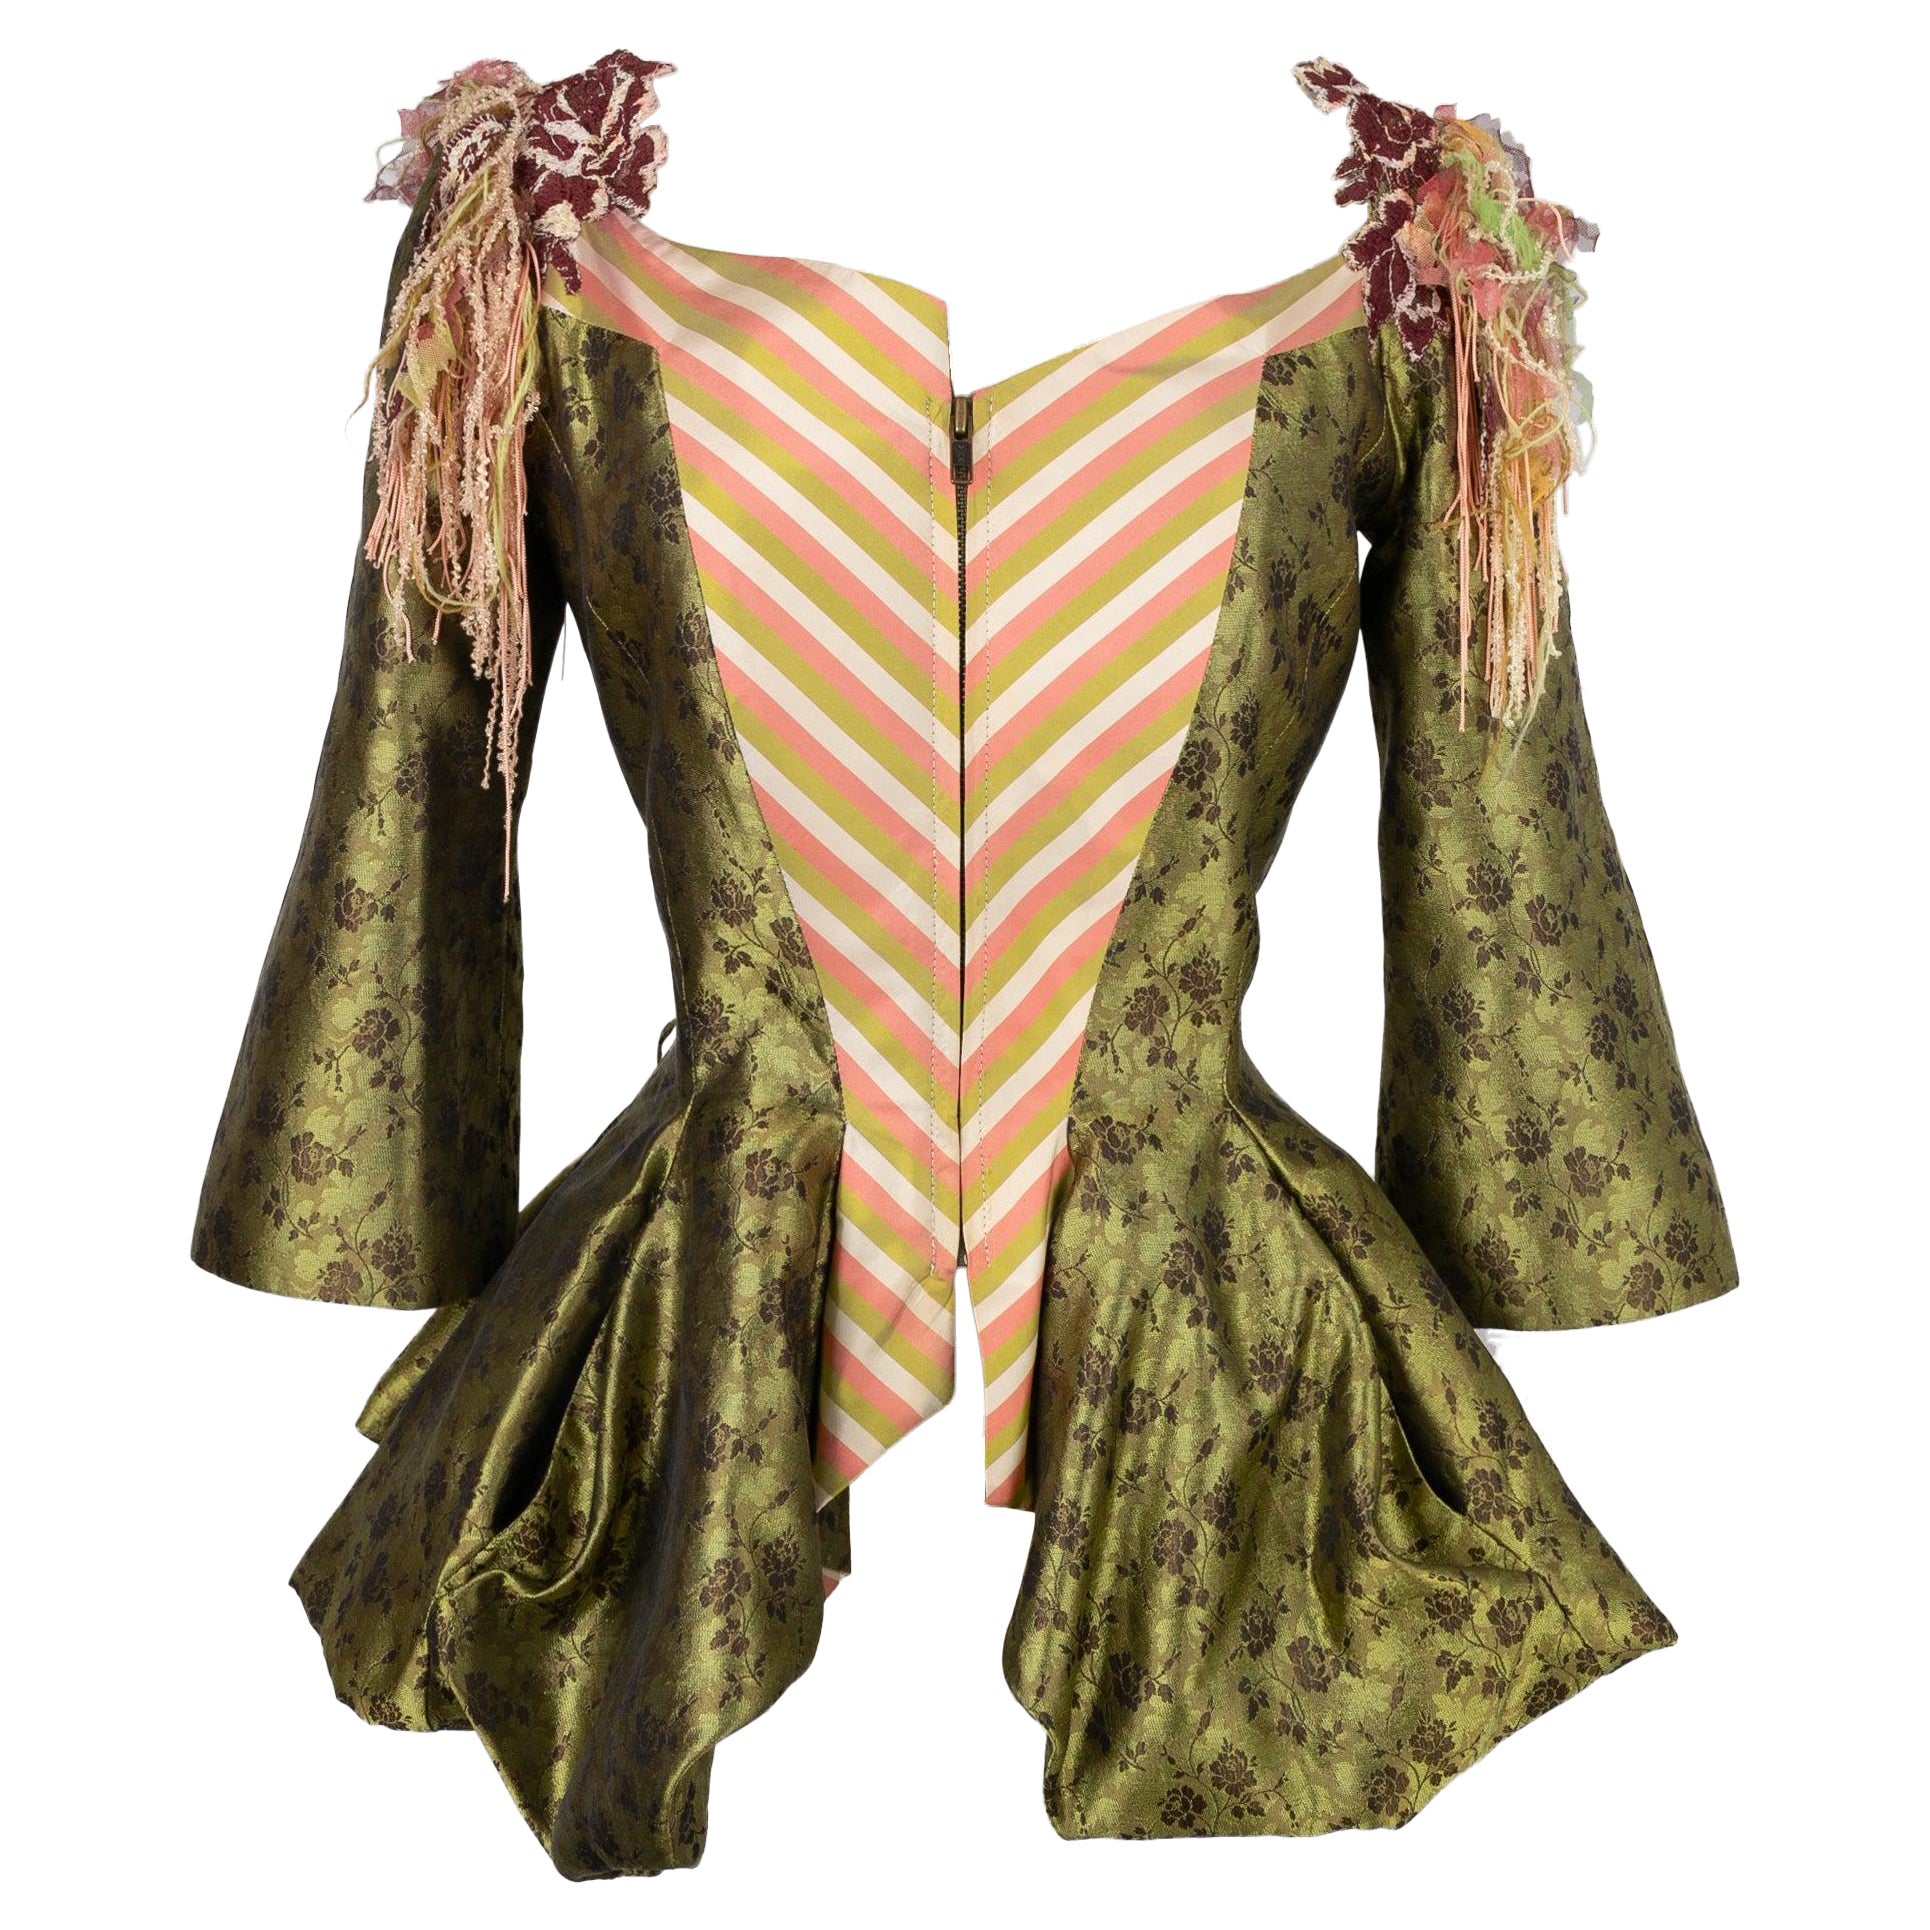 Christian Lacroix Silk Jacket in Green and Pink Tones